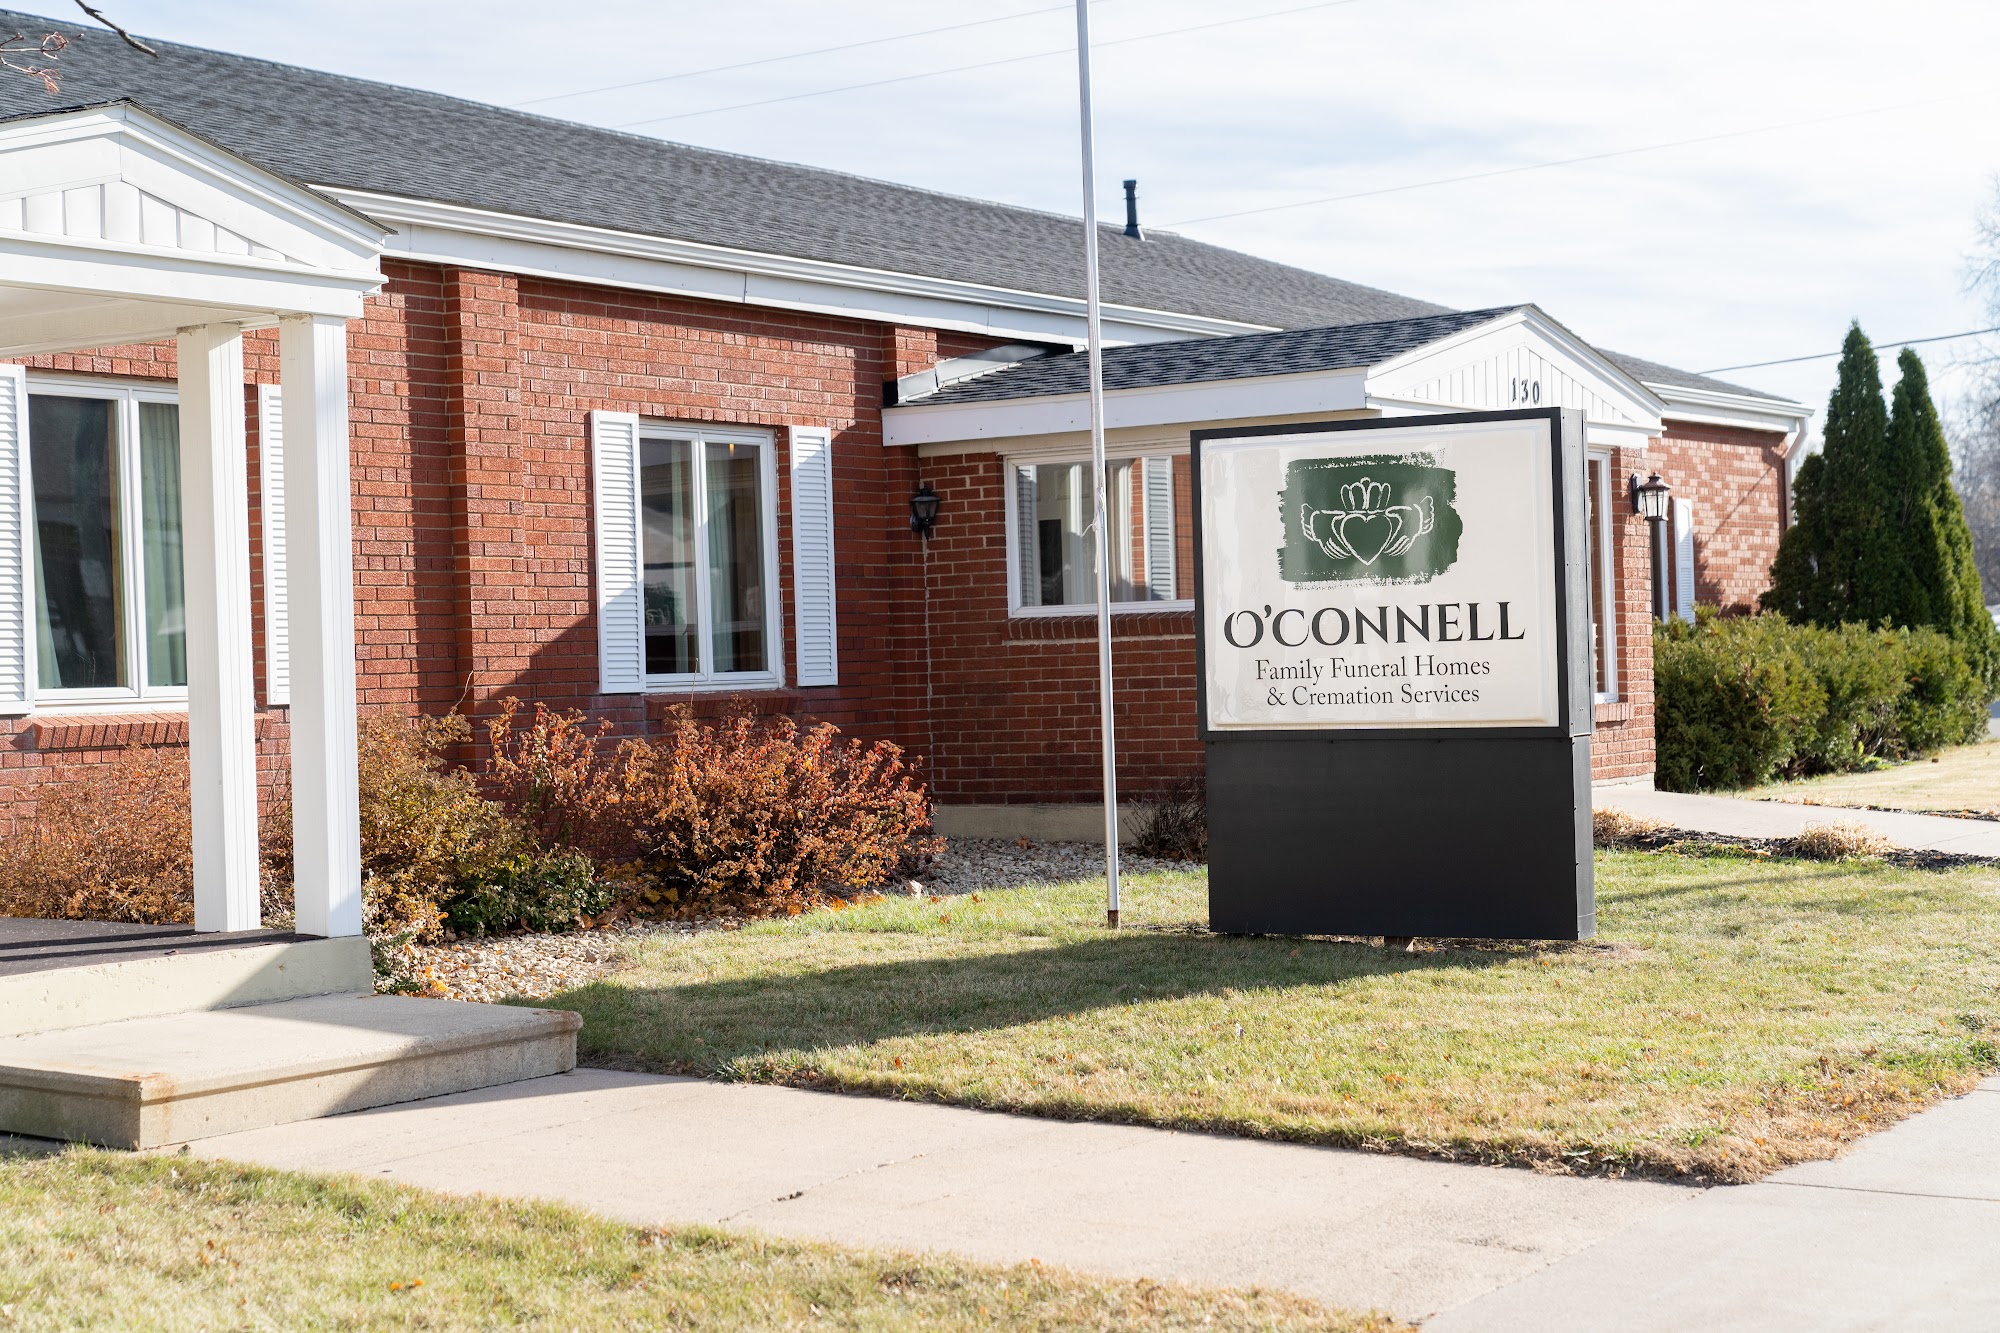 O'Connell Family Funeral Homes & Cremation 130 N Grant St, Ellsworth Wisconsin 54011